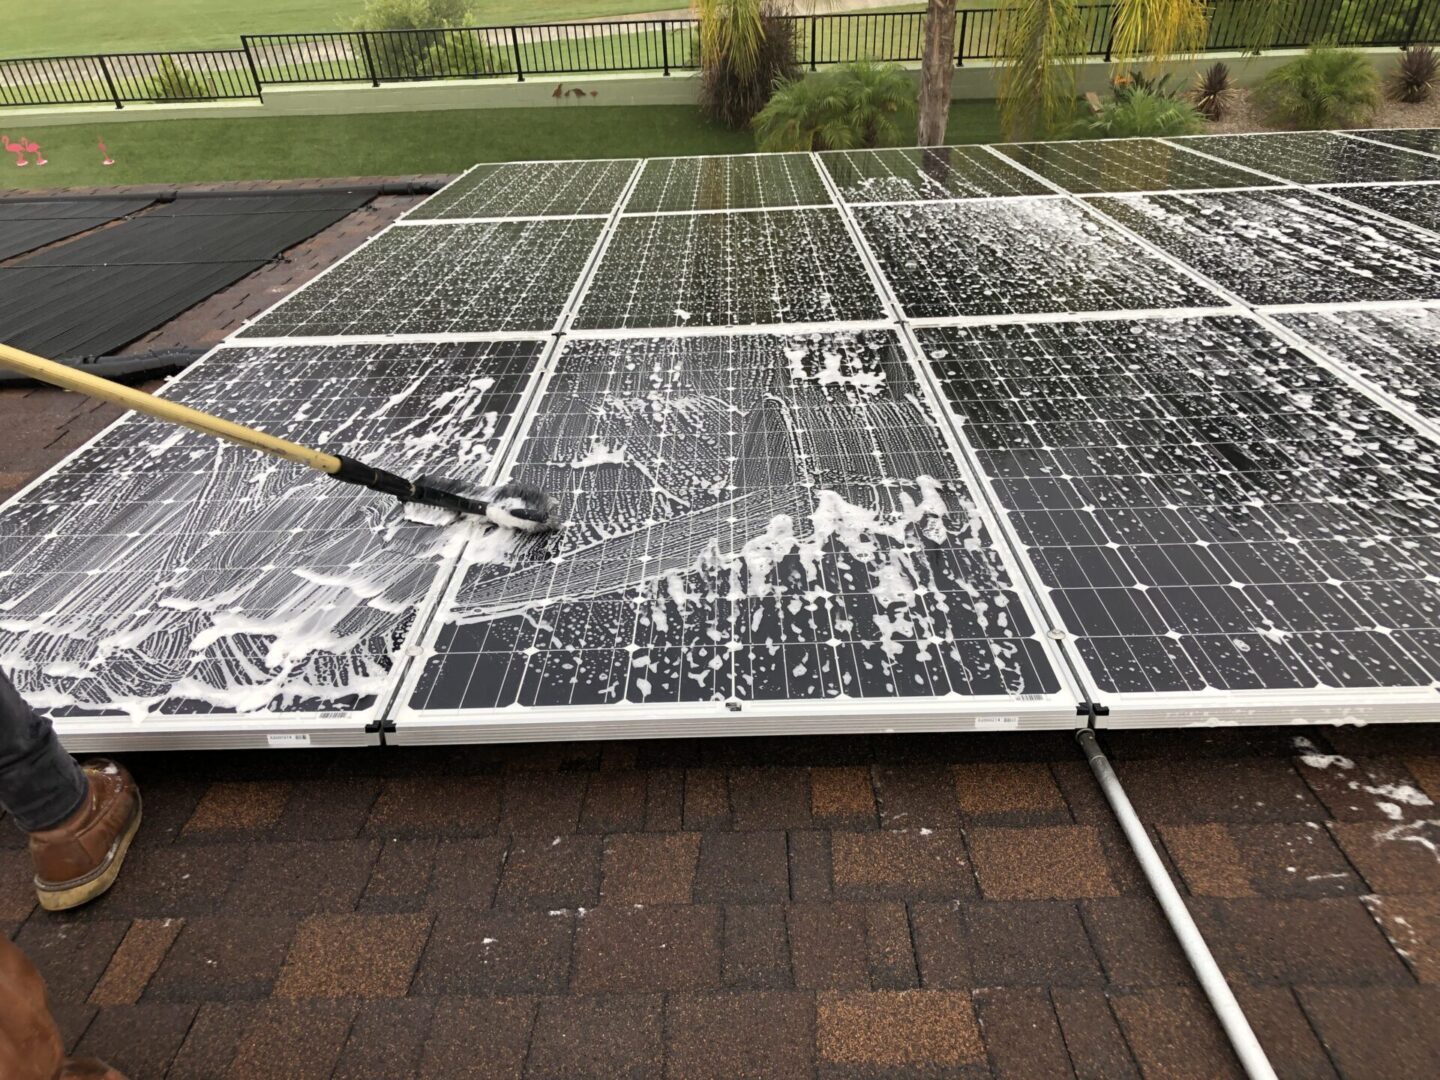 A person cleaning solar panels